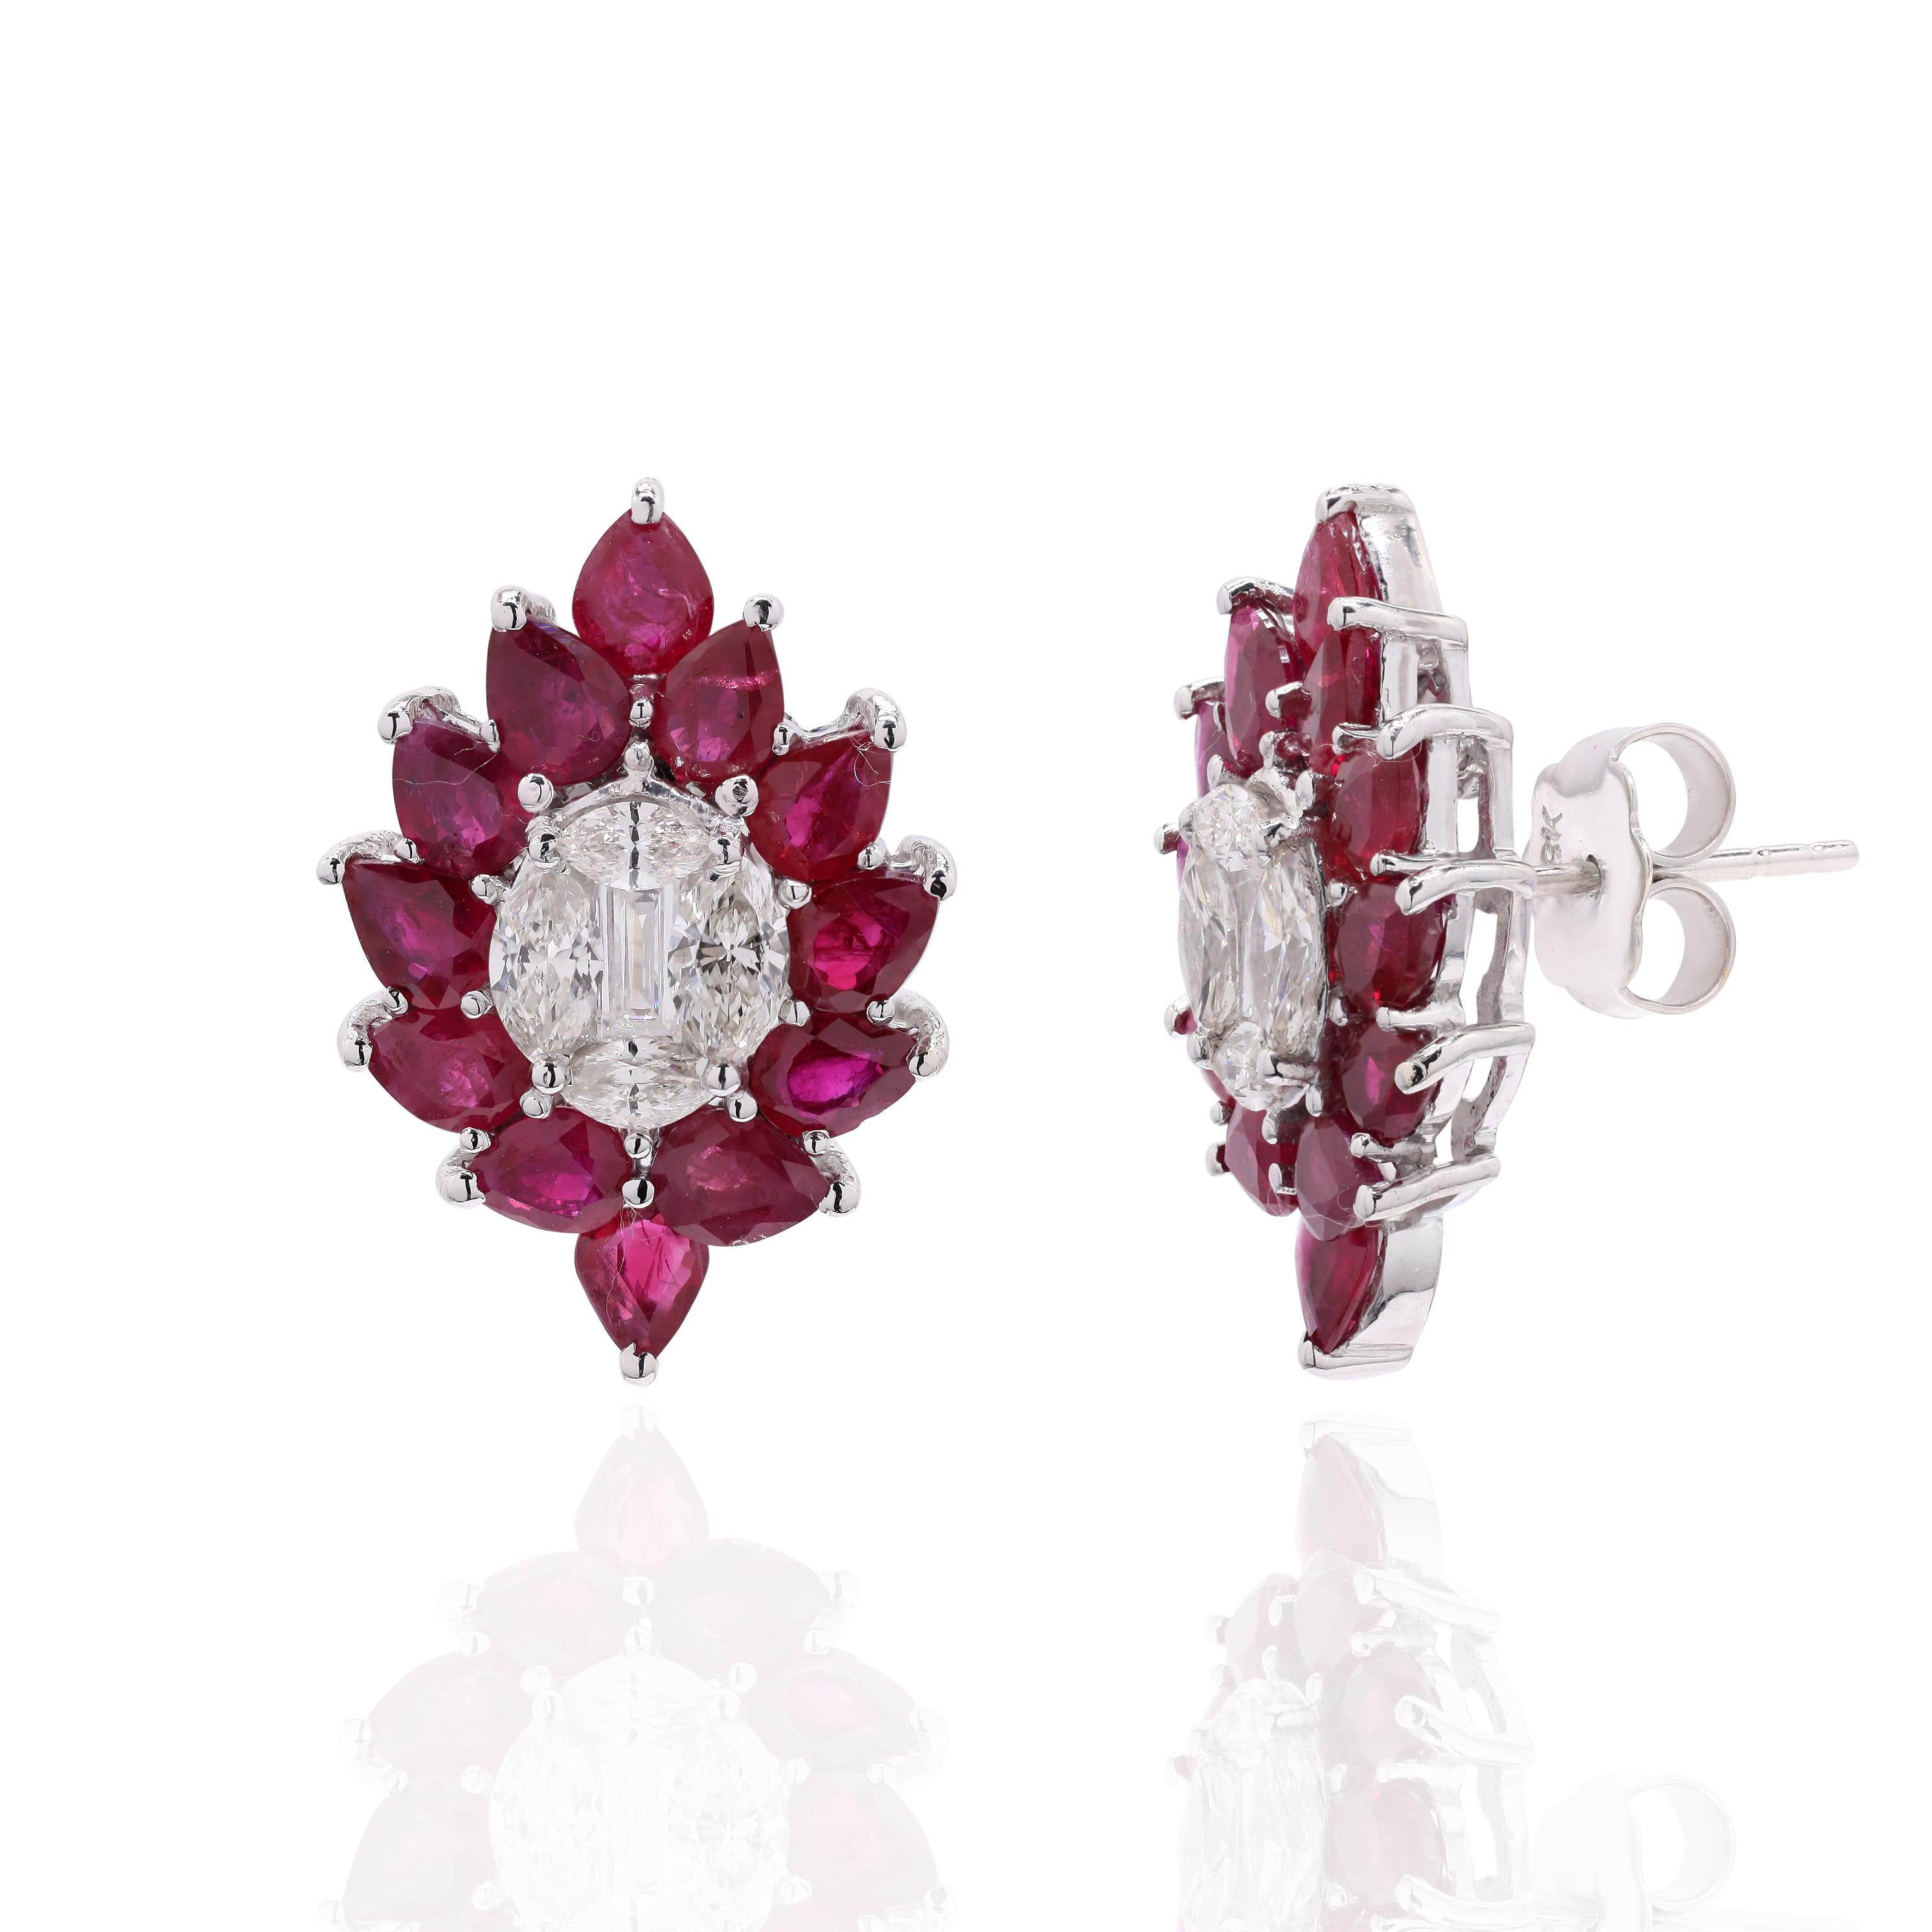 Earrings create a subtle beauty while showcasing the colors of the natural precious gemstones and illuminating diamonds making a statement.
Pear cut ruby and diamond statement earrings in 18K gold. Embrace your look with these stunning pair of